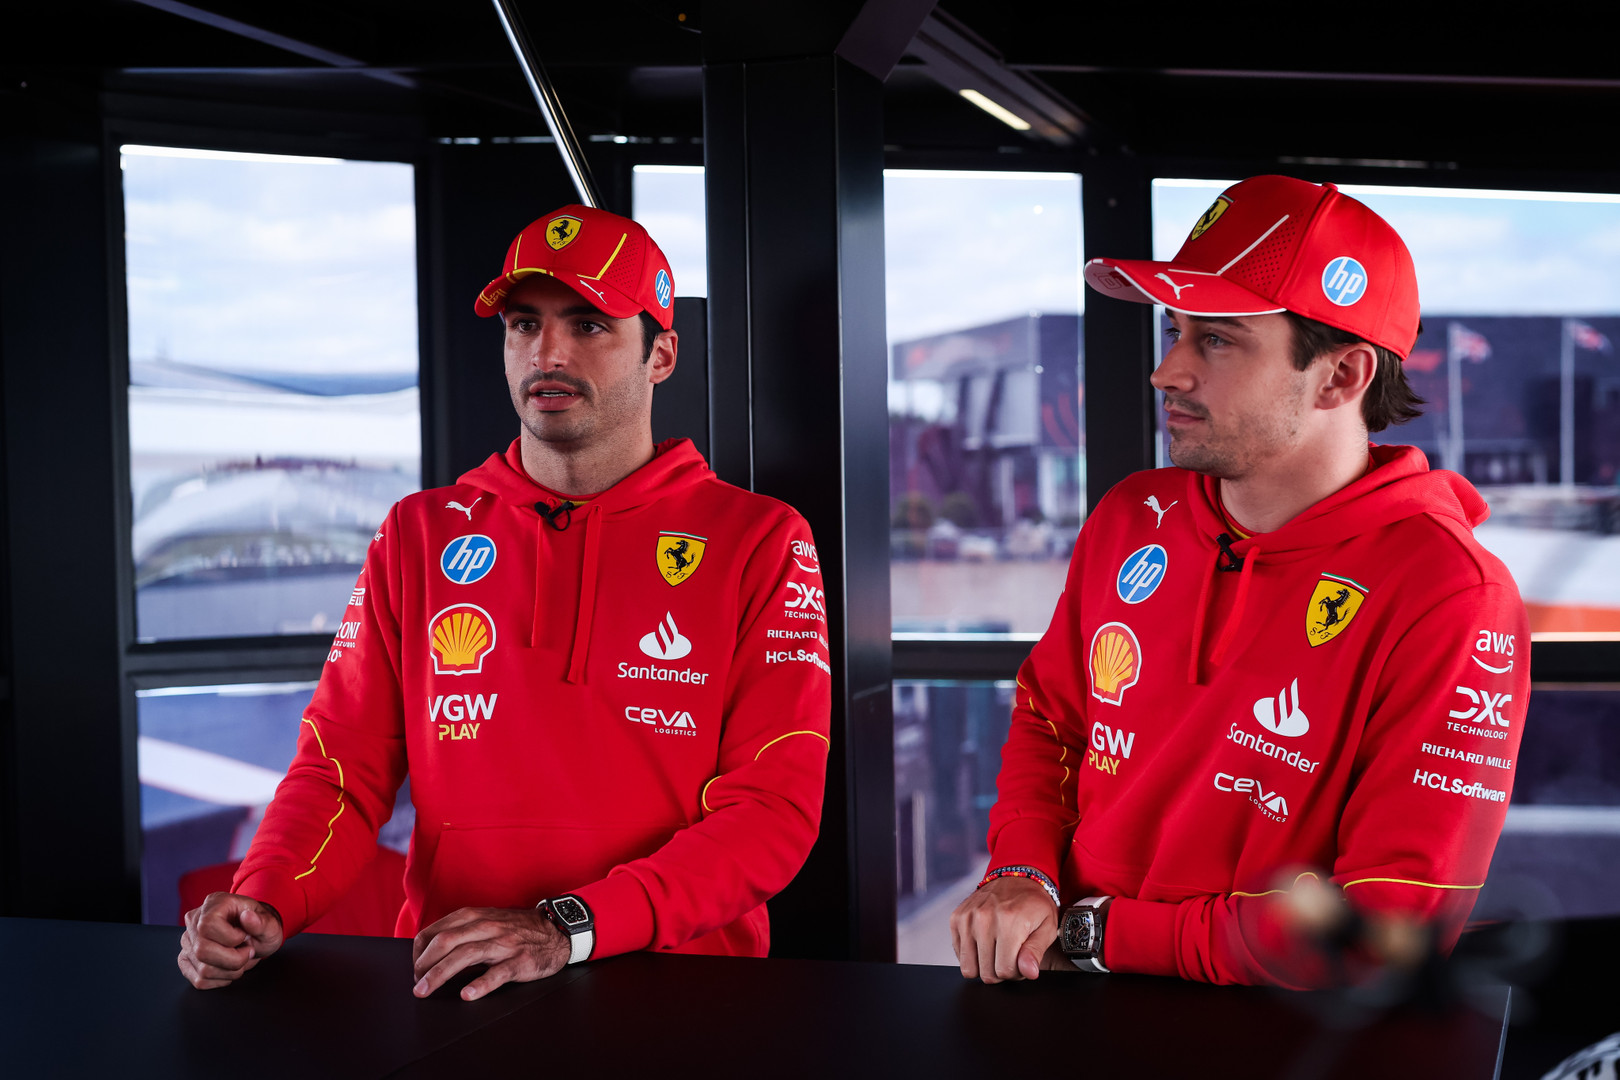 Ferrari cars set for comparative set-up test in practice at Silverstone